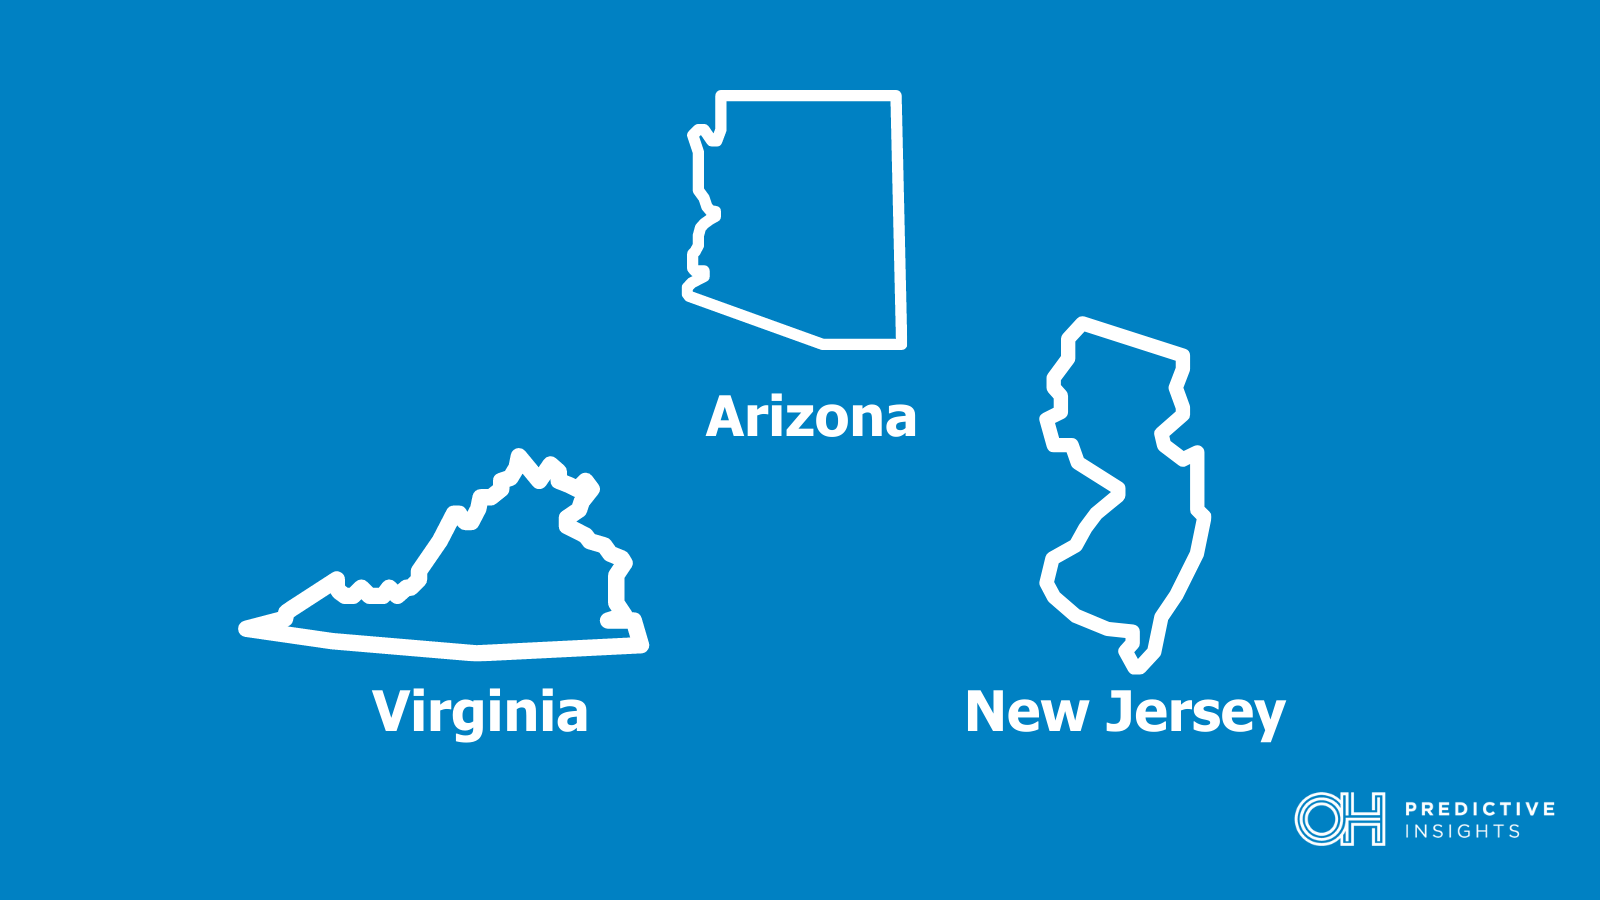 Virginia and New Jersey Swing Towards Republicans – What Does this Mean for Arizona?